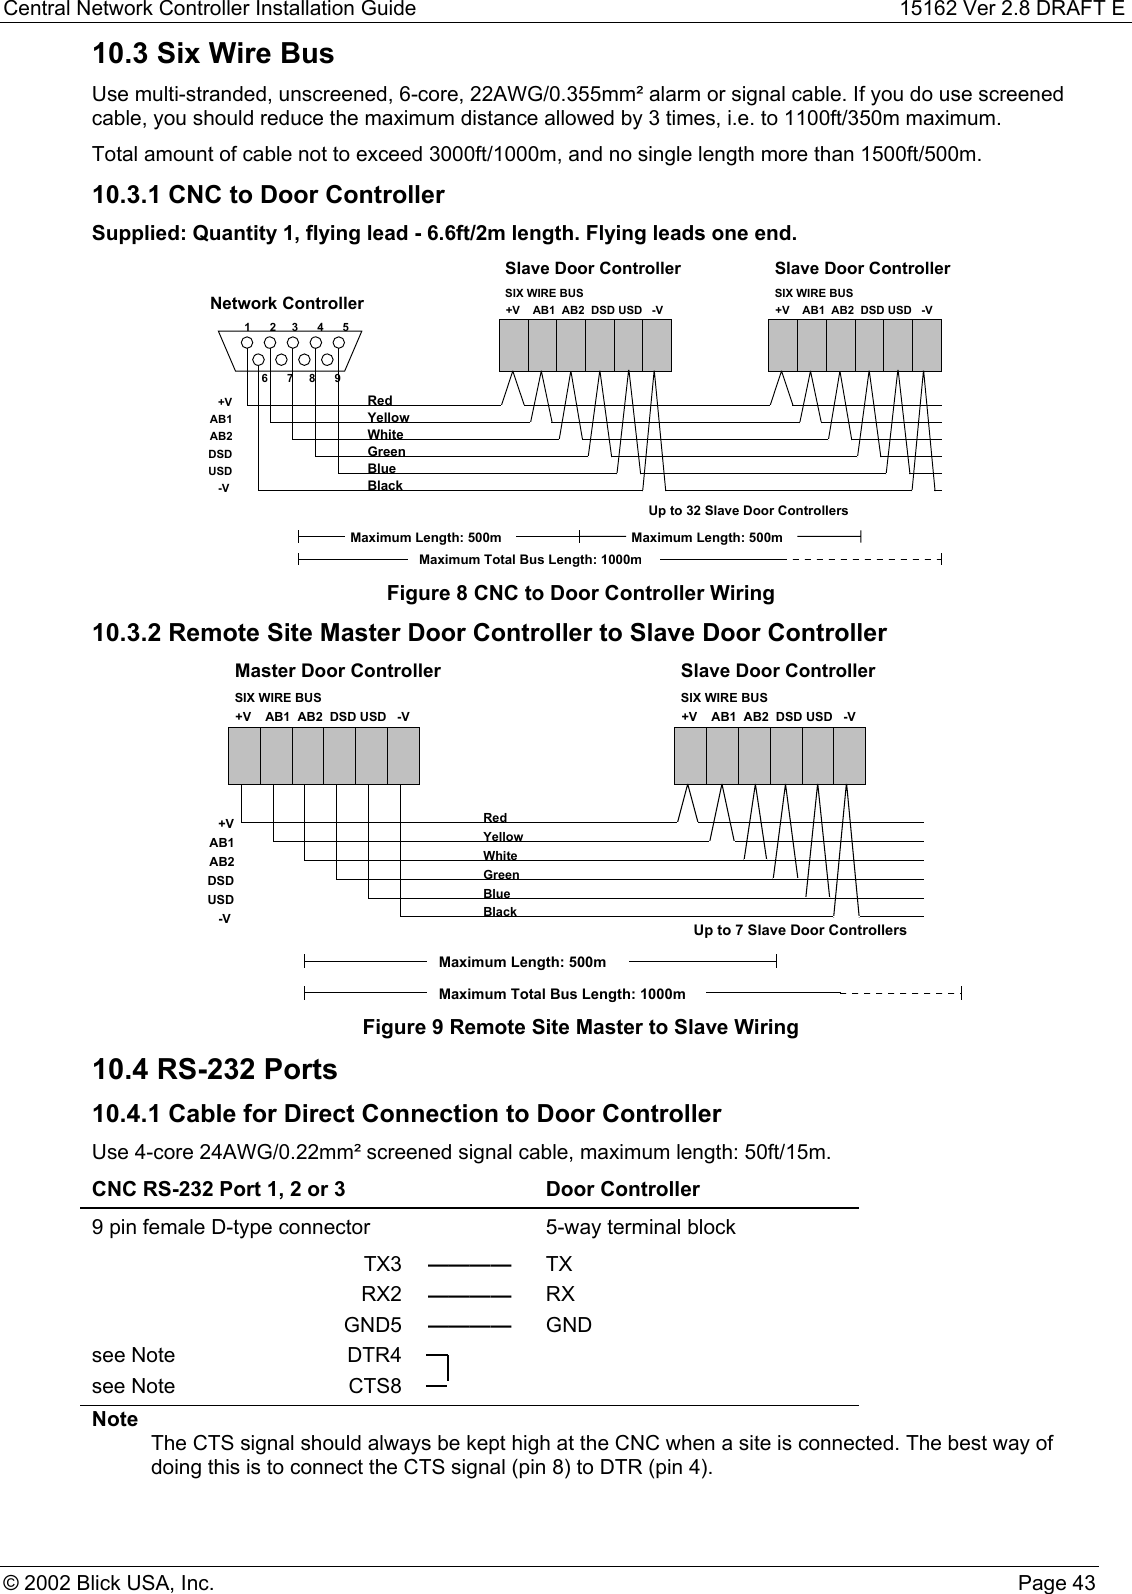 Central Network Controller Installation Guide 15162 Ver 2.8 DRAFT E© 2002 Blick USA, Inc. Page 4310.3 Six Wire BusUse multi-stranded, unscreened, 6-core, 22AWG/0.355mm² alarm or signal cable. If you do use screenedcable, you should reduce the maximum distance allowed by 3 times, i.e. to 1100ft/350m maximum.Total amount of cable not to exceed 3000ft/1000m, and no single length more than 1500ft/500m.10.3.1 CNC to Door ControllerSupplied: Quantity 1, flying lead - 6.6ft/2m length. Flying leads one end.+VAB1AB2USDDSD-VNetwork ControllerUp to 32 Slave Door Controllers  +V    AB1  AB2  DSD USD   -VSIX WIRE BUSSlave Door ControllerRedYellowWhiteGreenBlueBlack 1      2     3      4      5 6      7     8      9Maximum Length: 500mMaximum Total Bus Length: 1000m  +V    AB1  AB2  DSD USD   -VSIX WIRE BUSSlave Door ControllerMaximum Length: 500mFigure 8 CNC to Door Controller Wiring10.3.2 Remote Site Master Door Controller to Slave Door Controller  +V    AB1  AB2  DSD USD   -VSIX WIRE BUS+VAB1AB2USDDSD-V  +V    AB1  AB2  DSD USD   -VSIX WIRE BUSMaster Door Controller Slave Door ControllerUp to 7 Slave Door ControllersRedYellowWhiteGreenBlueBlackMaximum Length: 500mMaximum Total Bus Length: 1000mFigure 9 Remote Site Master to Slave Wiring10.4 RS-232 Ports10.4.1 Cable for Direct Connection to Door ControllerUse 4-core 24AWG/0.22mm² screened signal cable, maximum length: 50ft/15m.CNC RS-232 Port 1, 2 or 3 Door Controller9 pin female D-type connector 5-way terminal blockTX3 ———— TXRX2 ———— RXGND5 ———— GNDsee Note DTR4see Note  CTS8NoteThe CTS signal should always be kept high at the CNC when a site is connected. The best way ofdoing this is to connect the CTS signal (pin 8) to DTR (pin 4).